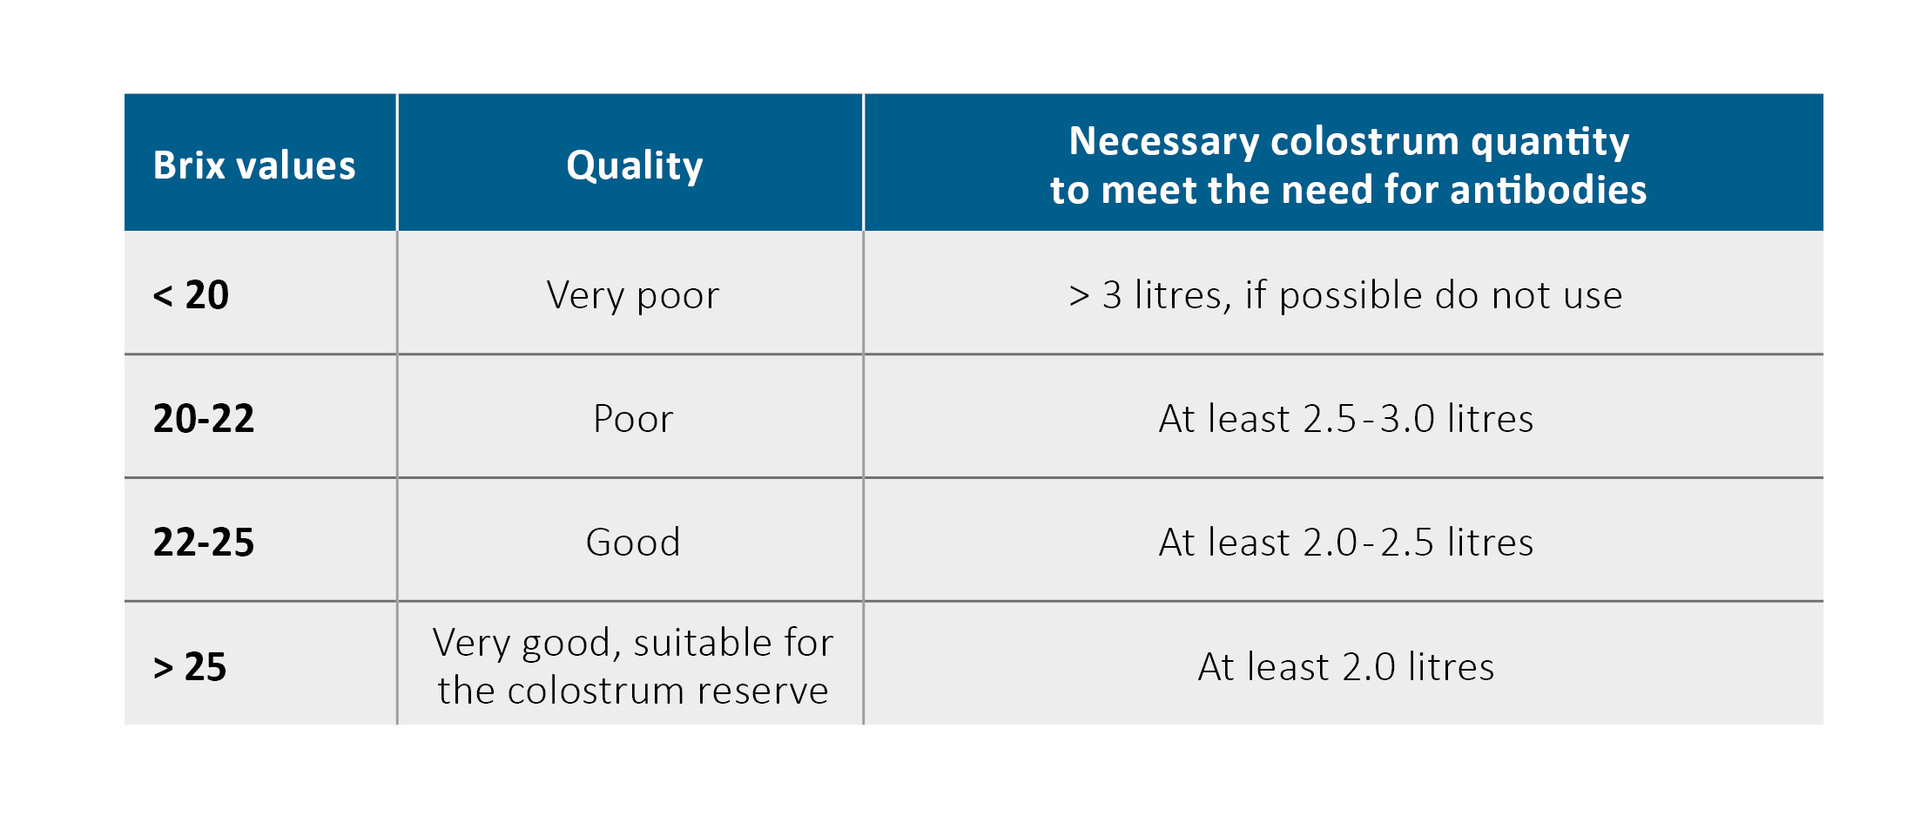 Overview of the assessment of quality of colostrum